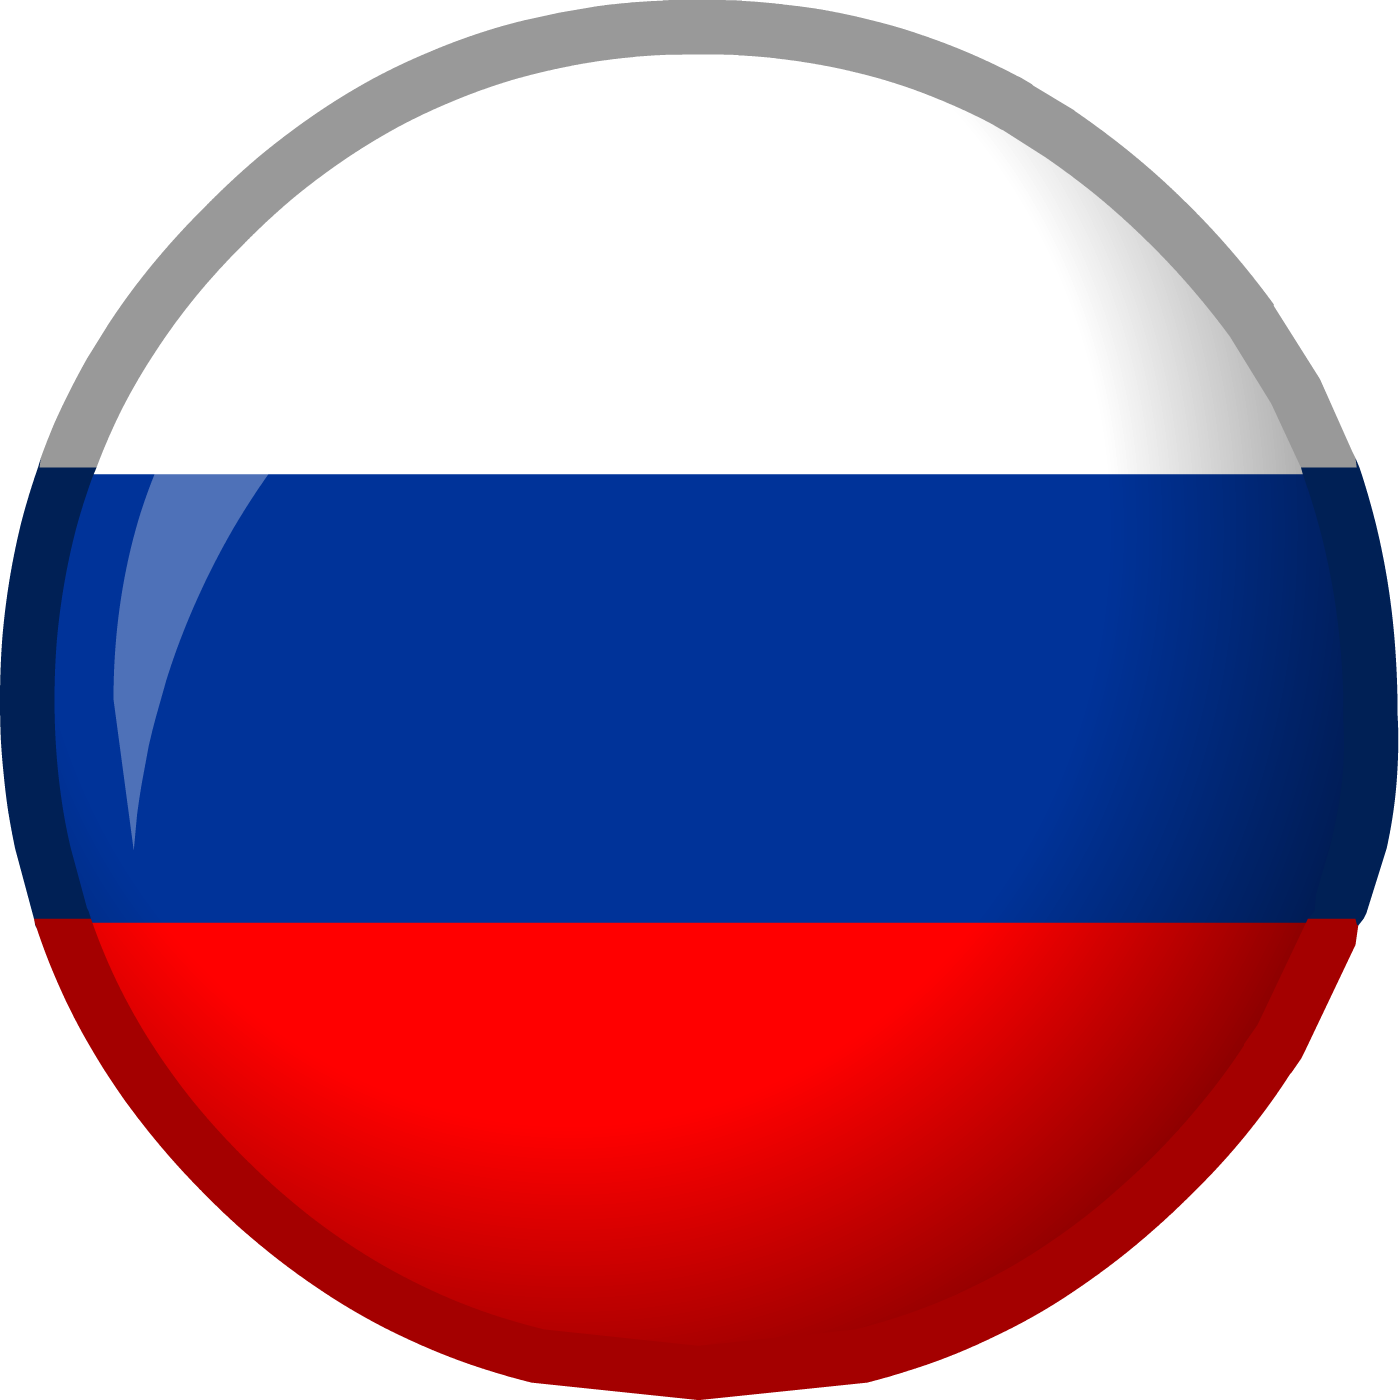 Russia Flag Image Free Download PNG HD PNG Image